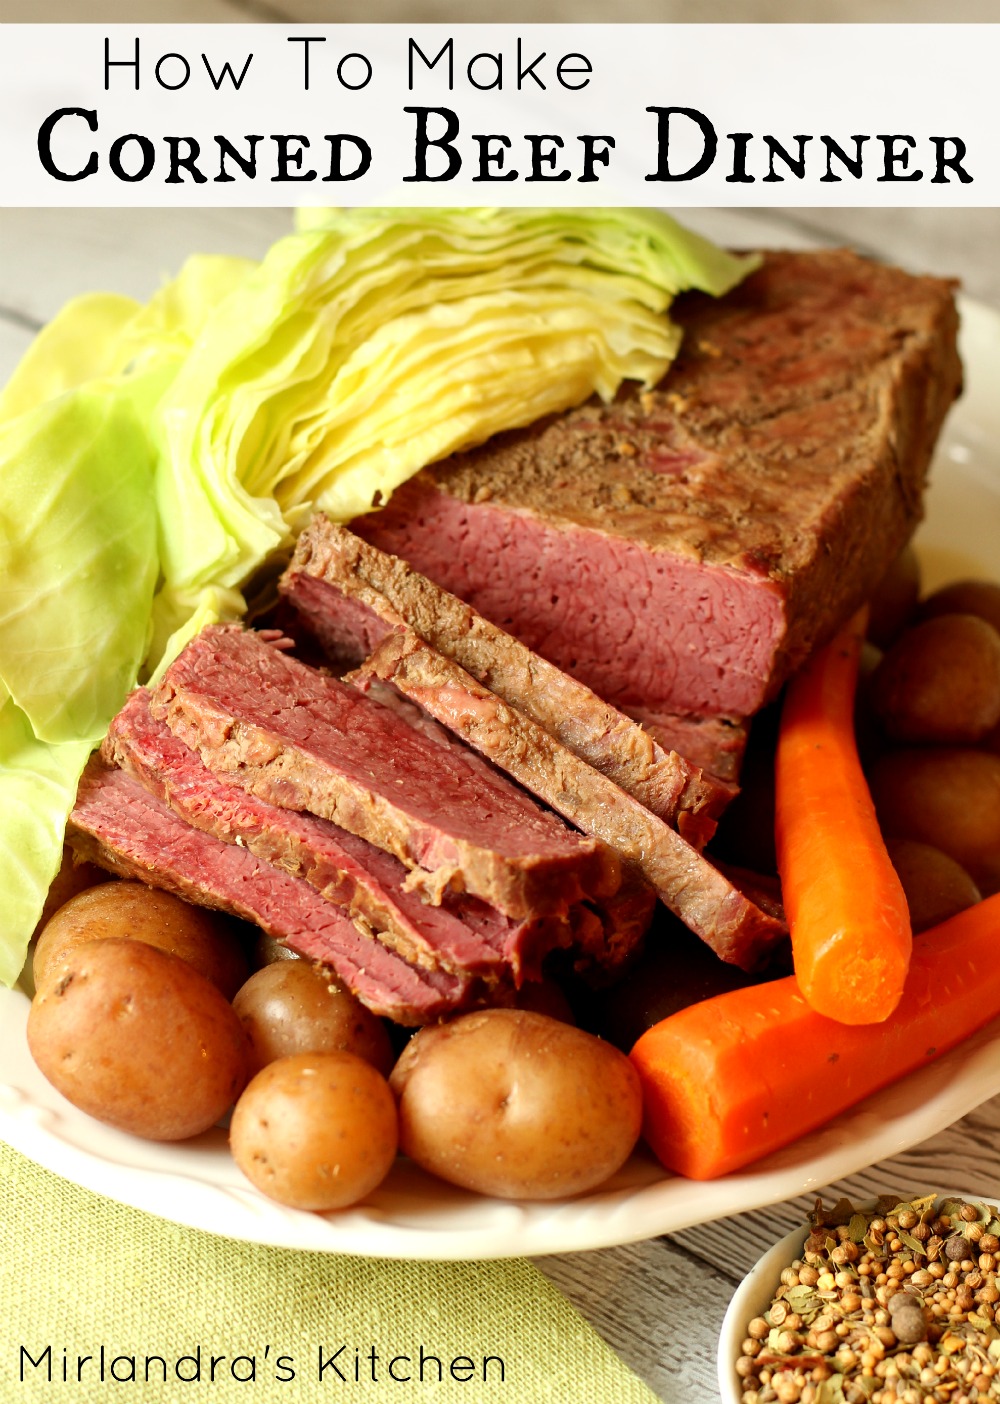 This corned beef dinner recipe is easy and delicious. I walk you through step by step to make this St. Patty's Day meal. Wait till you see what I put in it!